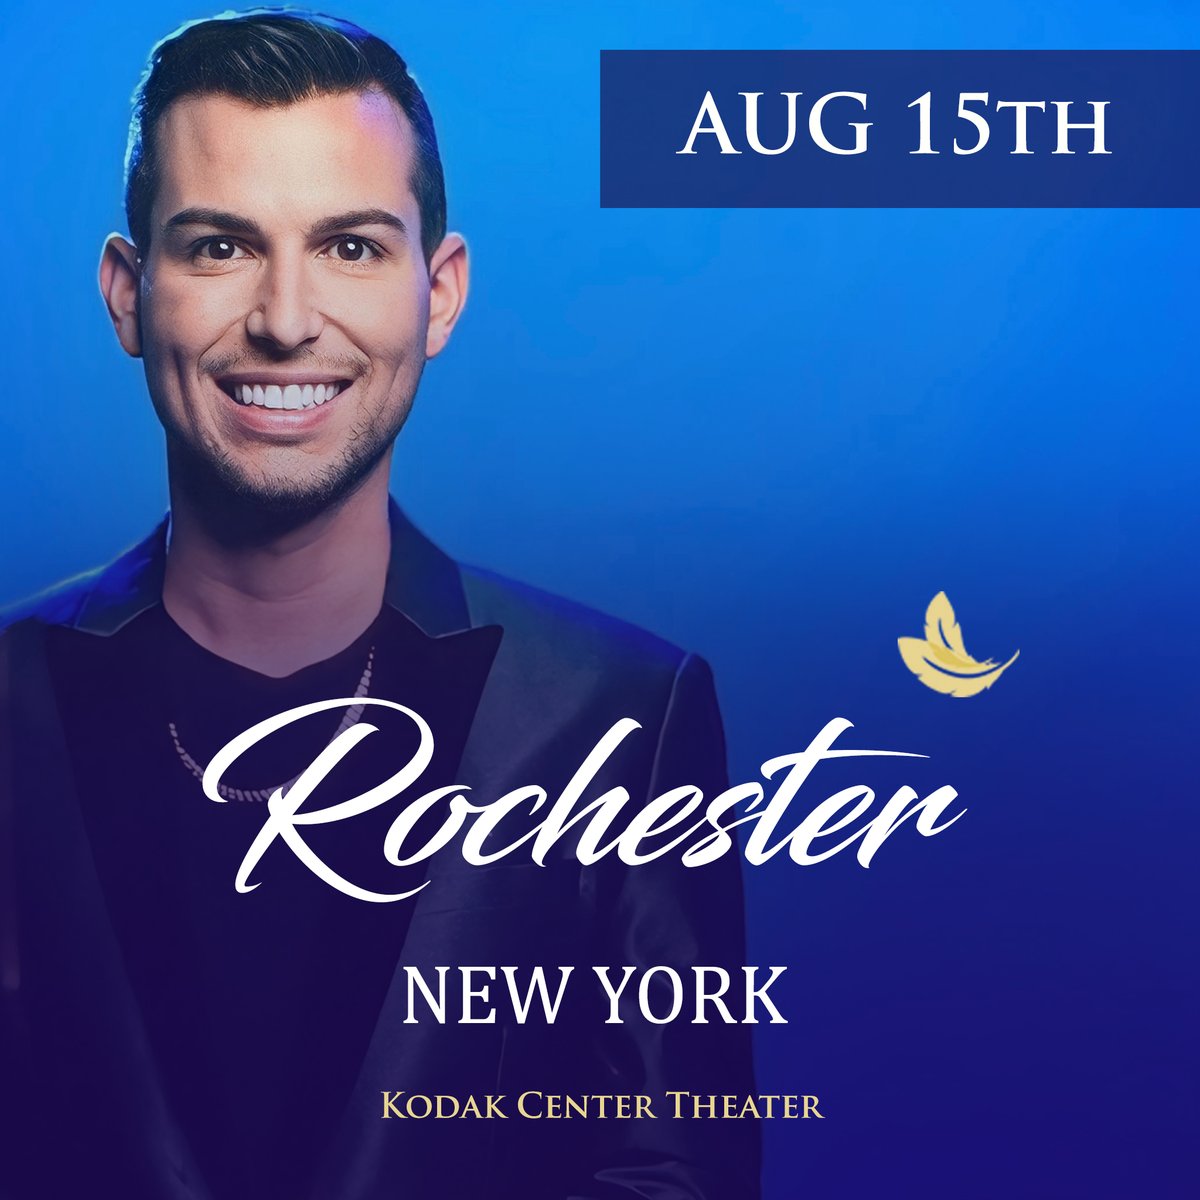 📢 Join me, Rochester, for an incredible night at the Kodak Center Theater on August 15th! Make sure to grab your seat by visiting MeetMattFraser.com